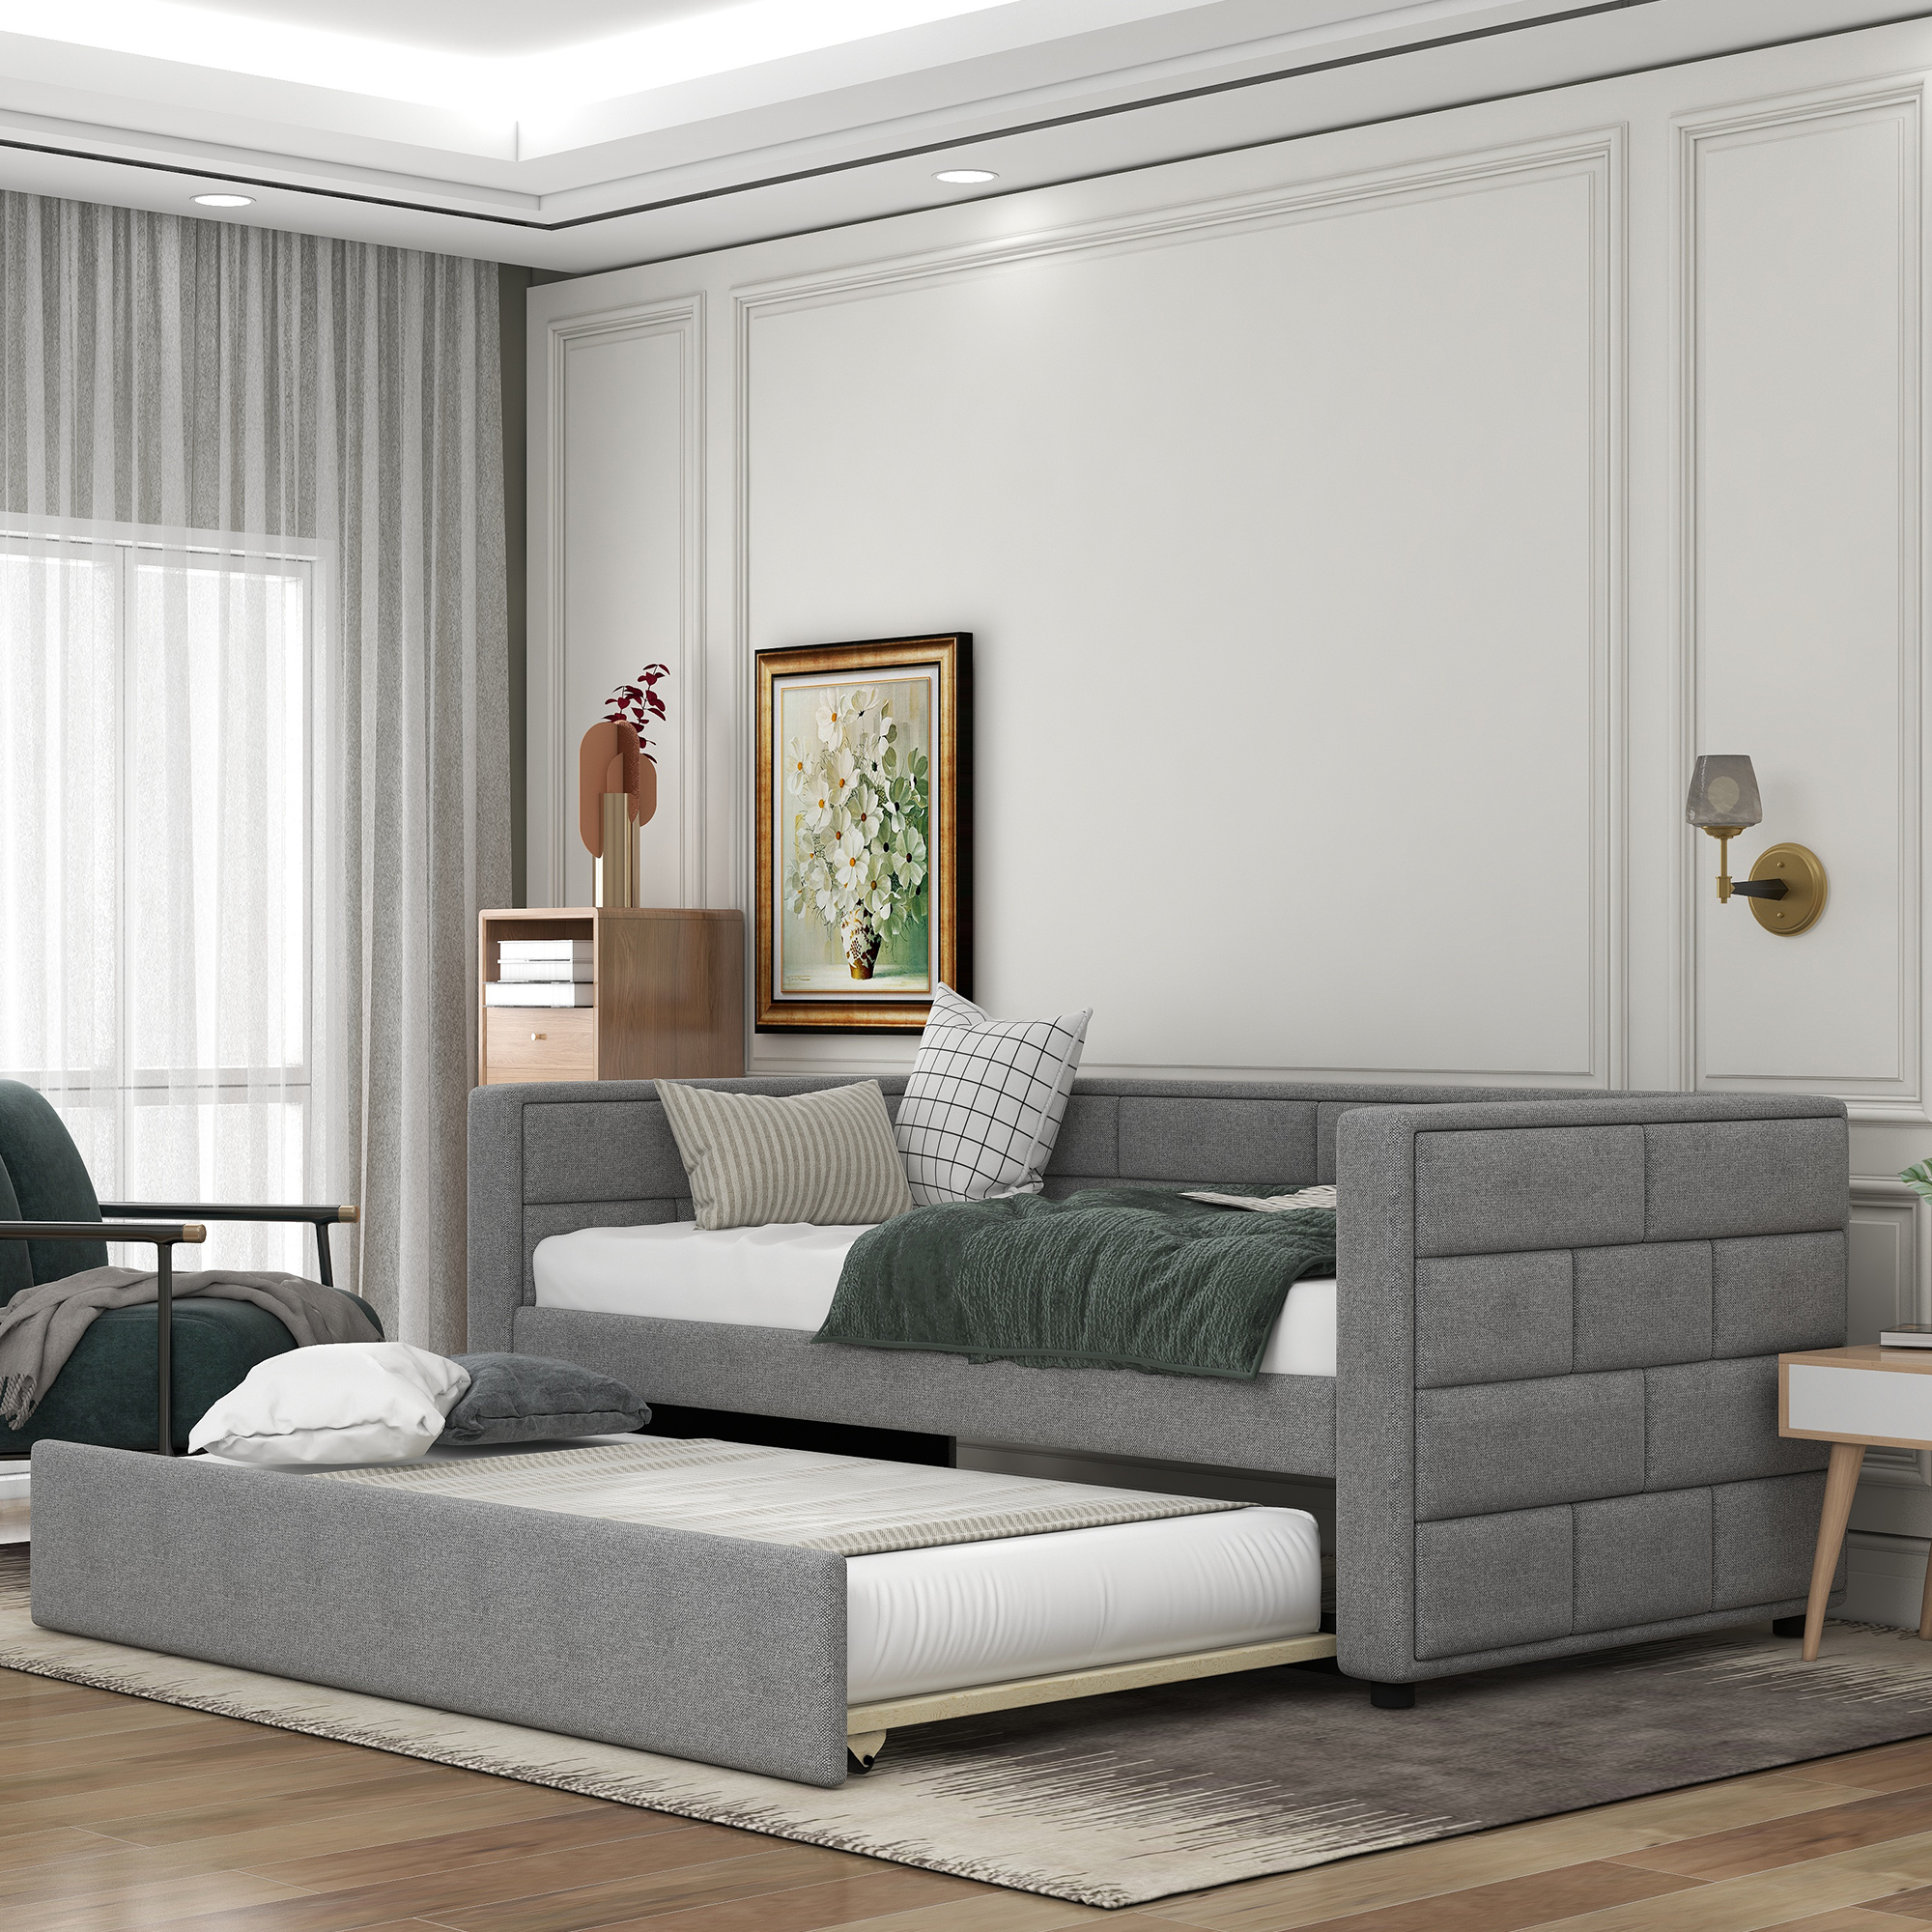 Twin Size Upholstered Daybed with Trundle and Padded Back - Bedroom Furniture - Gray - image 2 of 10